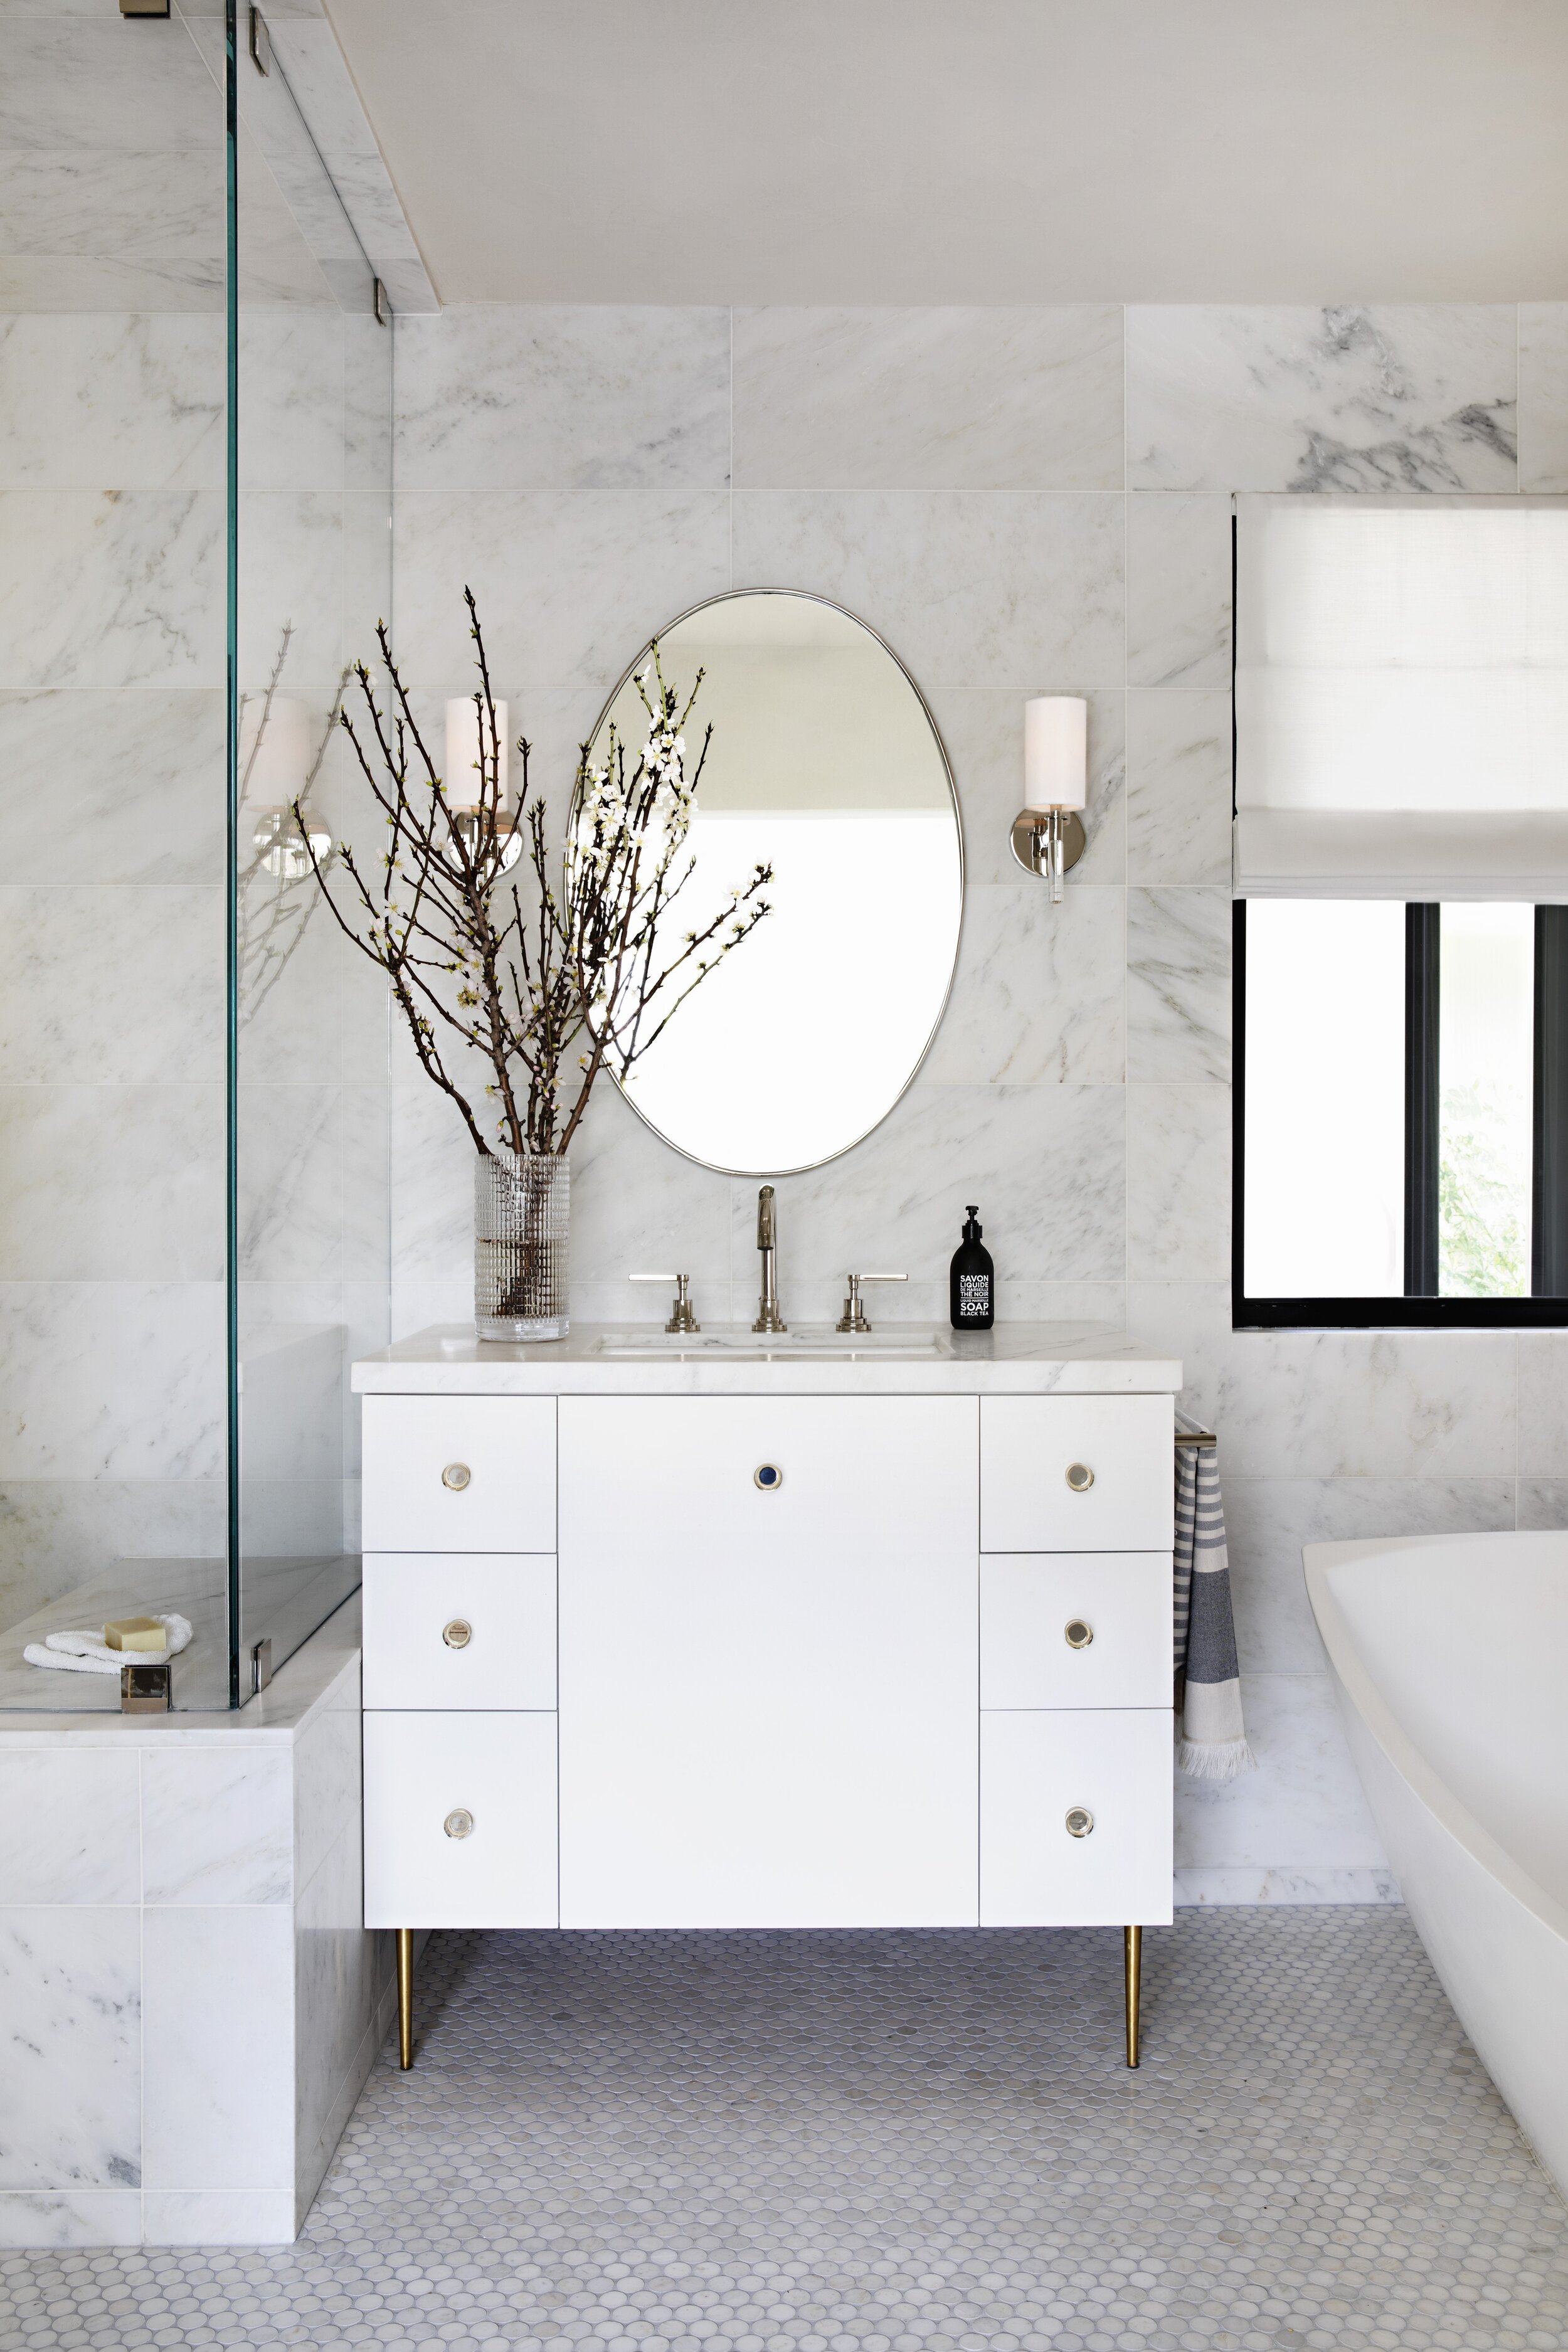  A Beverly Hills bathroom designed by Lori. Photograph by  Karyn Millet  